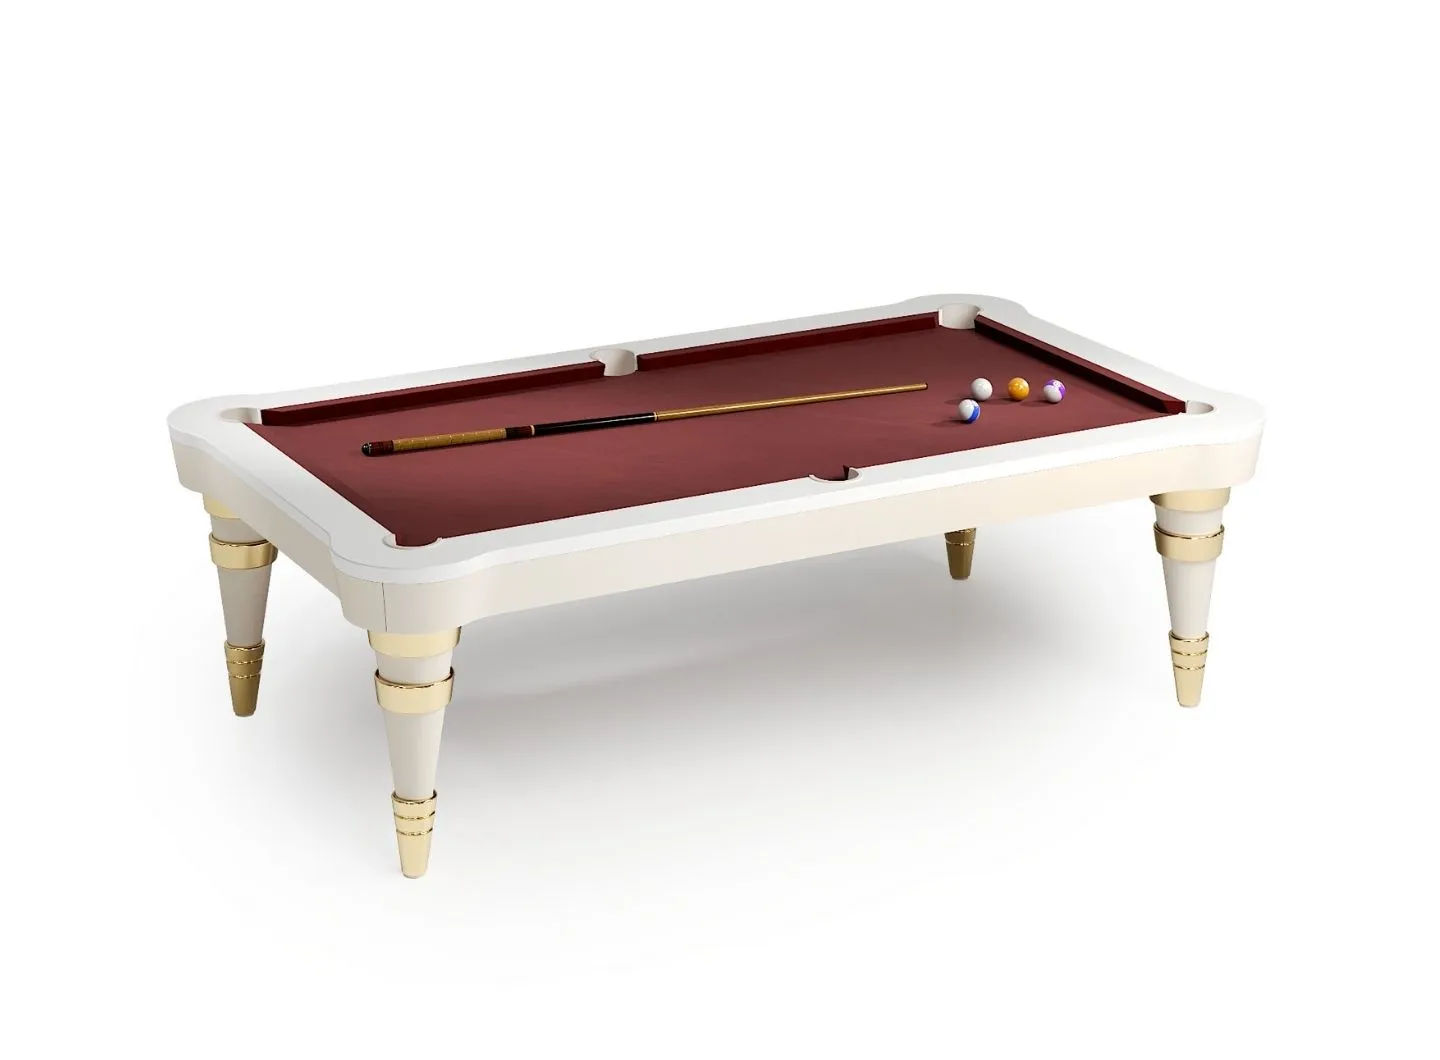 luxury pool table with gold details by Vismara Design